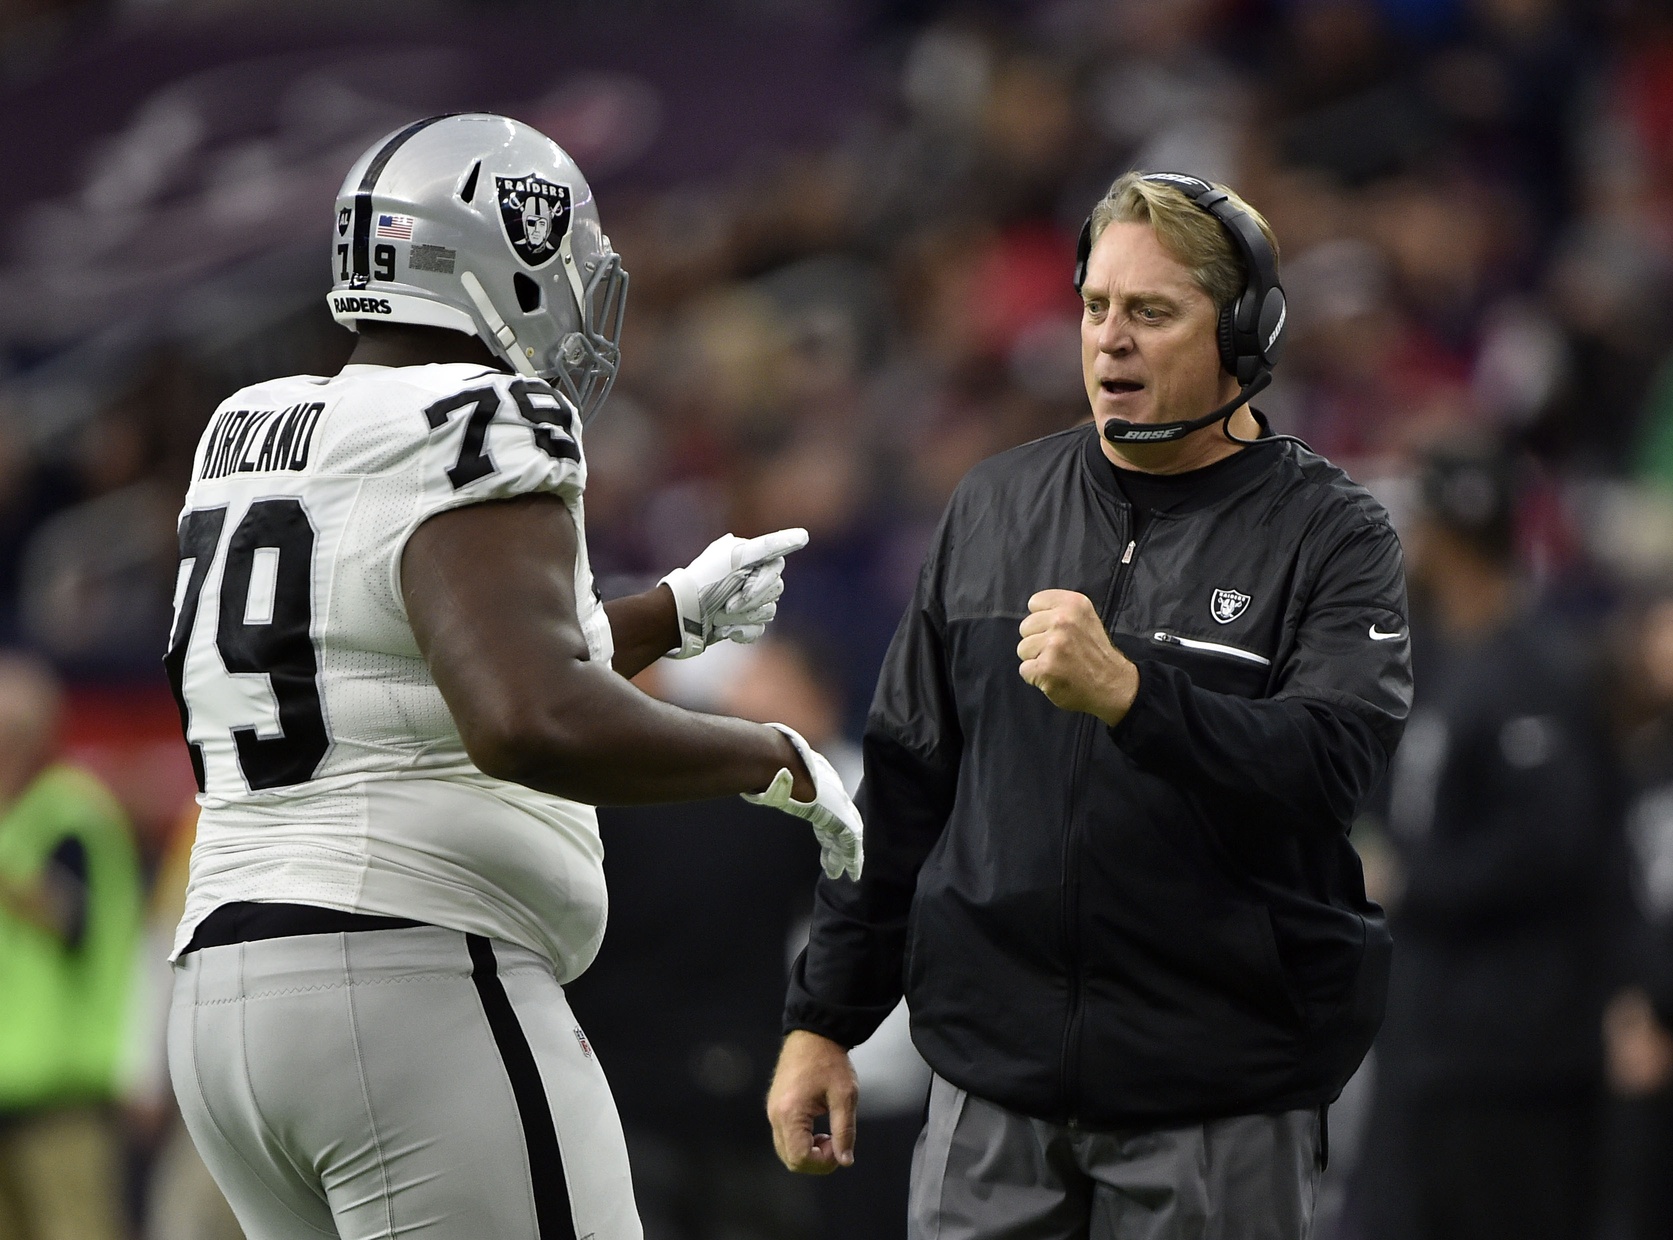 Jan 7, 2017; Houston, TX, USA; Oakland Raiders head coach Jack Del Rio celebrates with offensive guard Denver Kirkland (79) during the first half of the AFC Wild Card playoff football game against the Houston Texans at NRG Stadium. Mandatory Credit: Jerome Miron-USA TODAY Sports